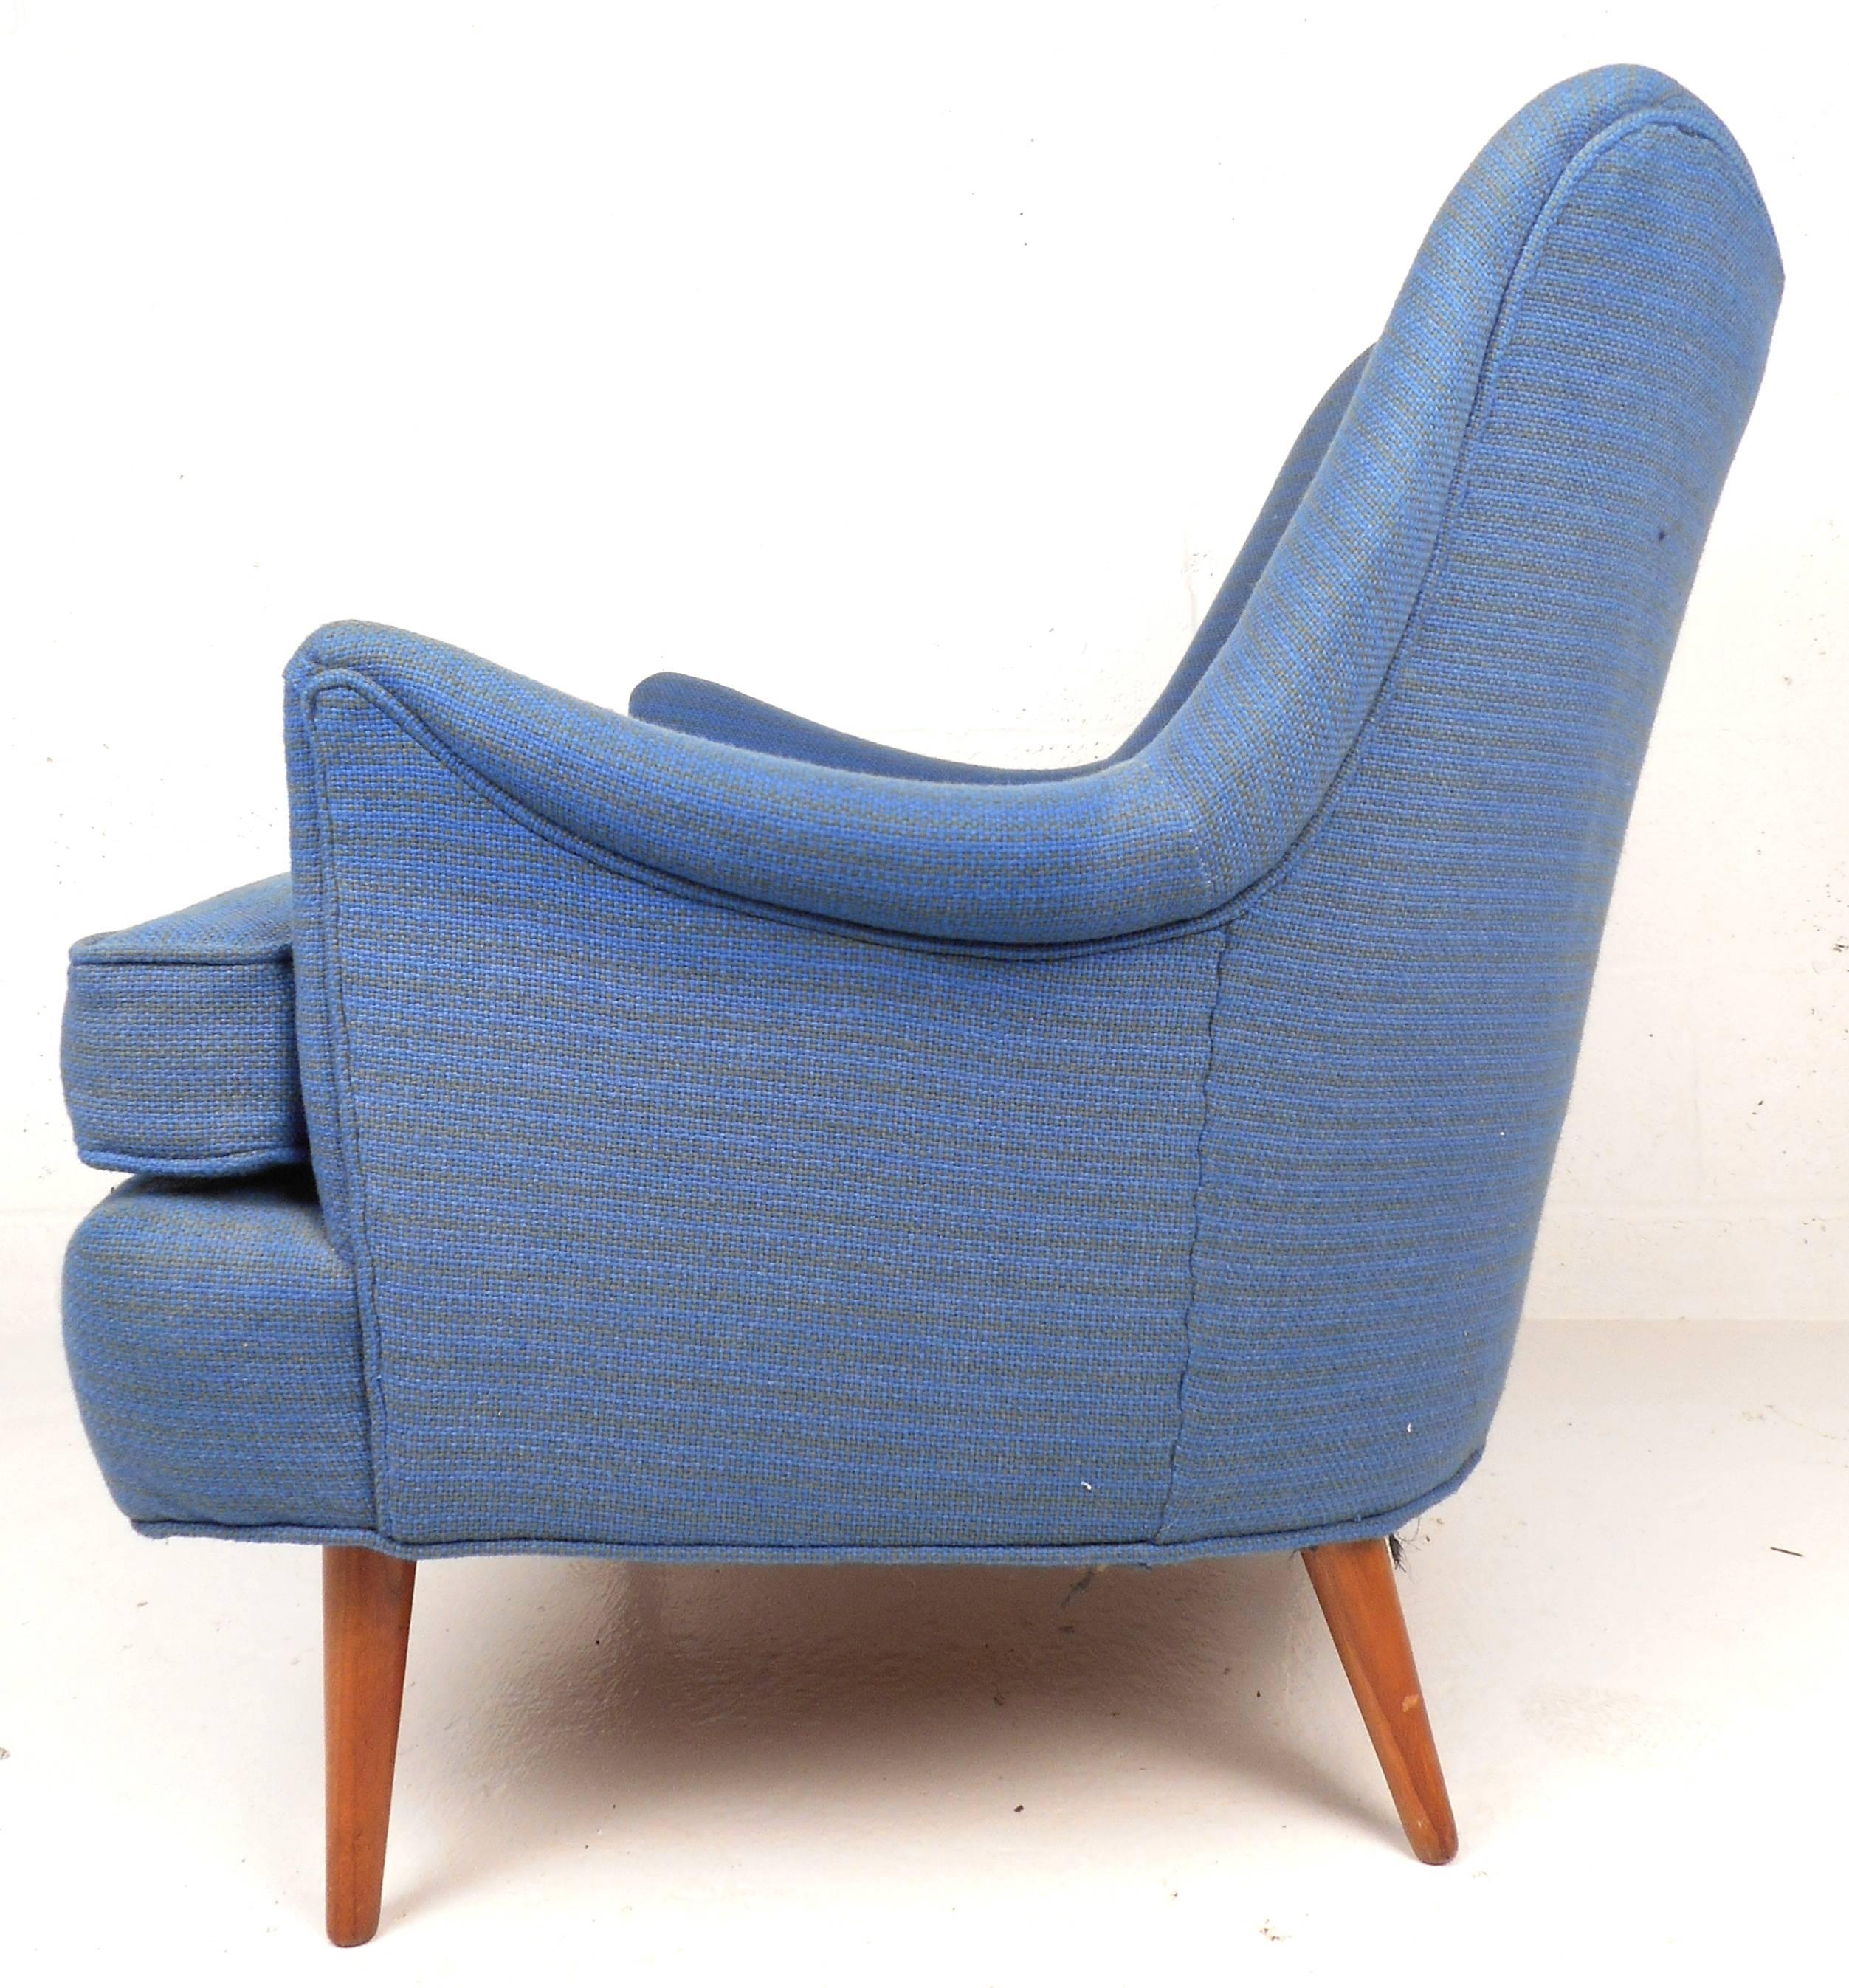 American Mid-Century Modern Lounge Chair in the Style of Adrian Pearsall